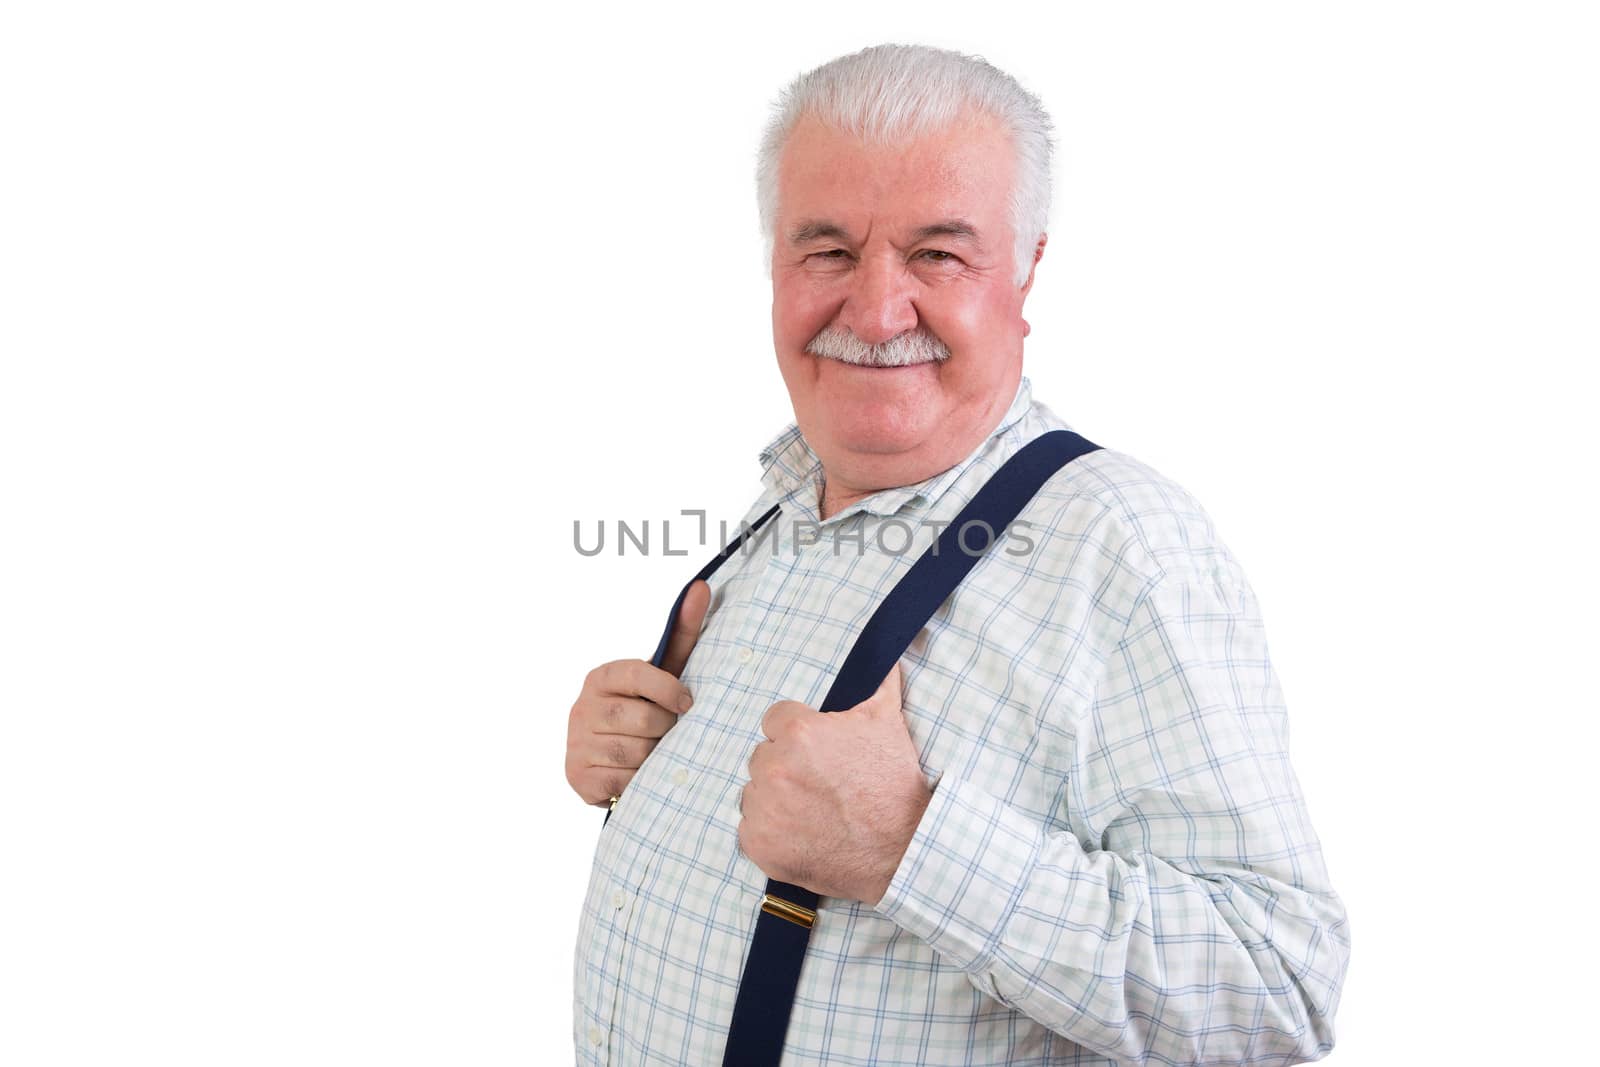 Jovial confident elderly man with a moustache and his hands hooked through his suspenders beaming happily at the camera, upper body isolated on white